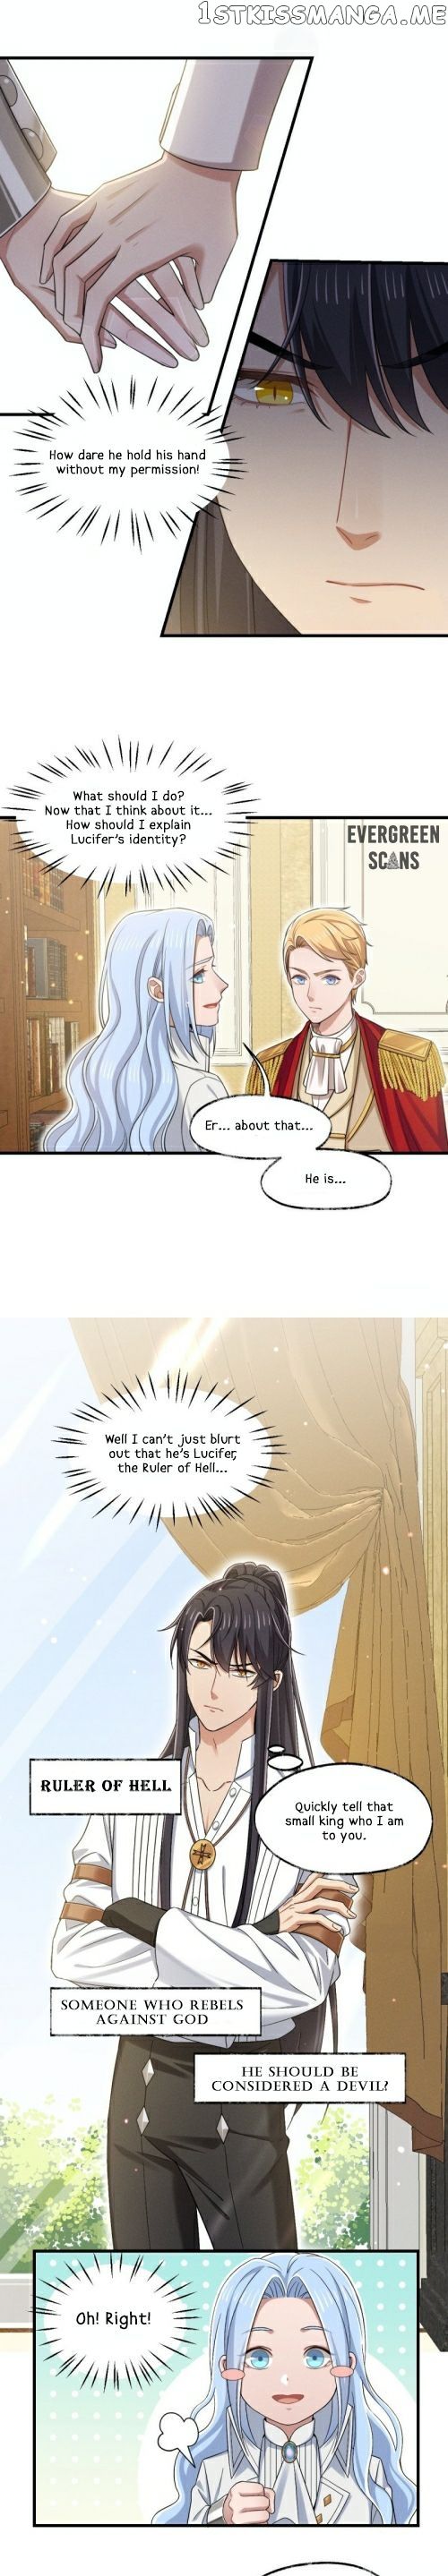 Elegy Of The Heavens chapter 13 - Page 4